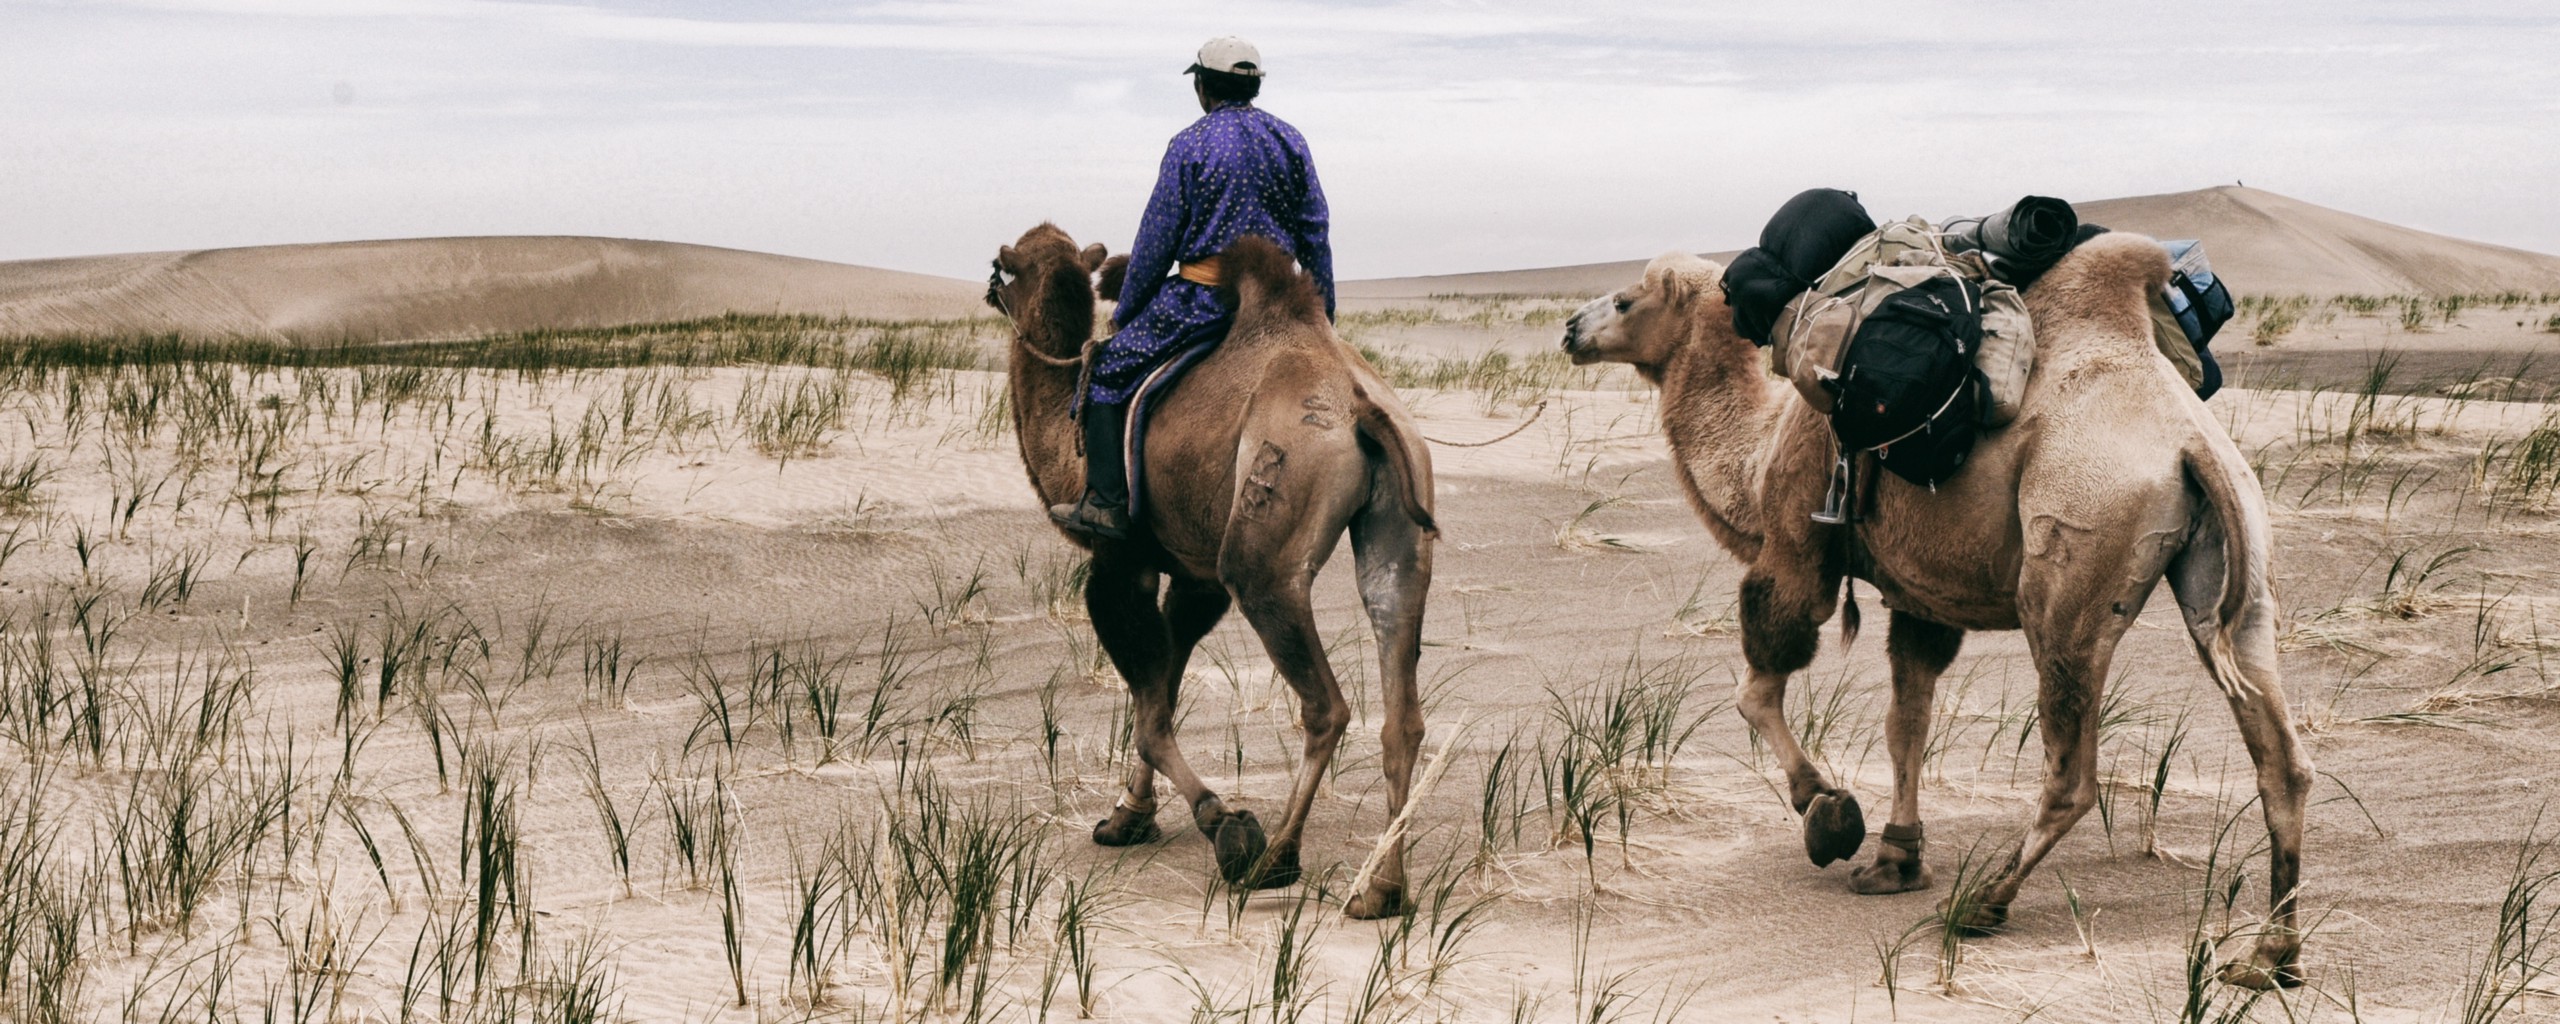 A person riding a camel, with another camel carrying their possessions in tow.